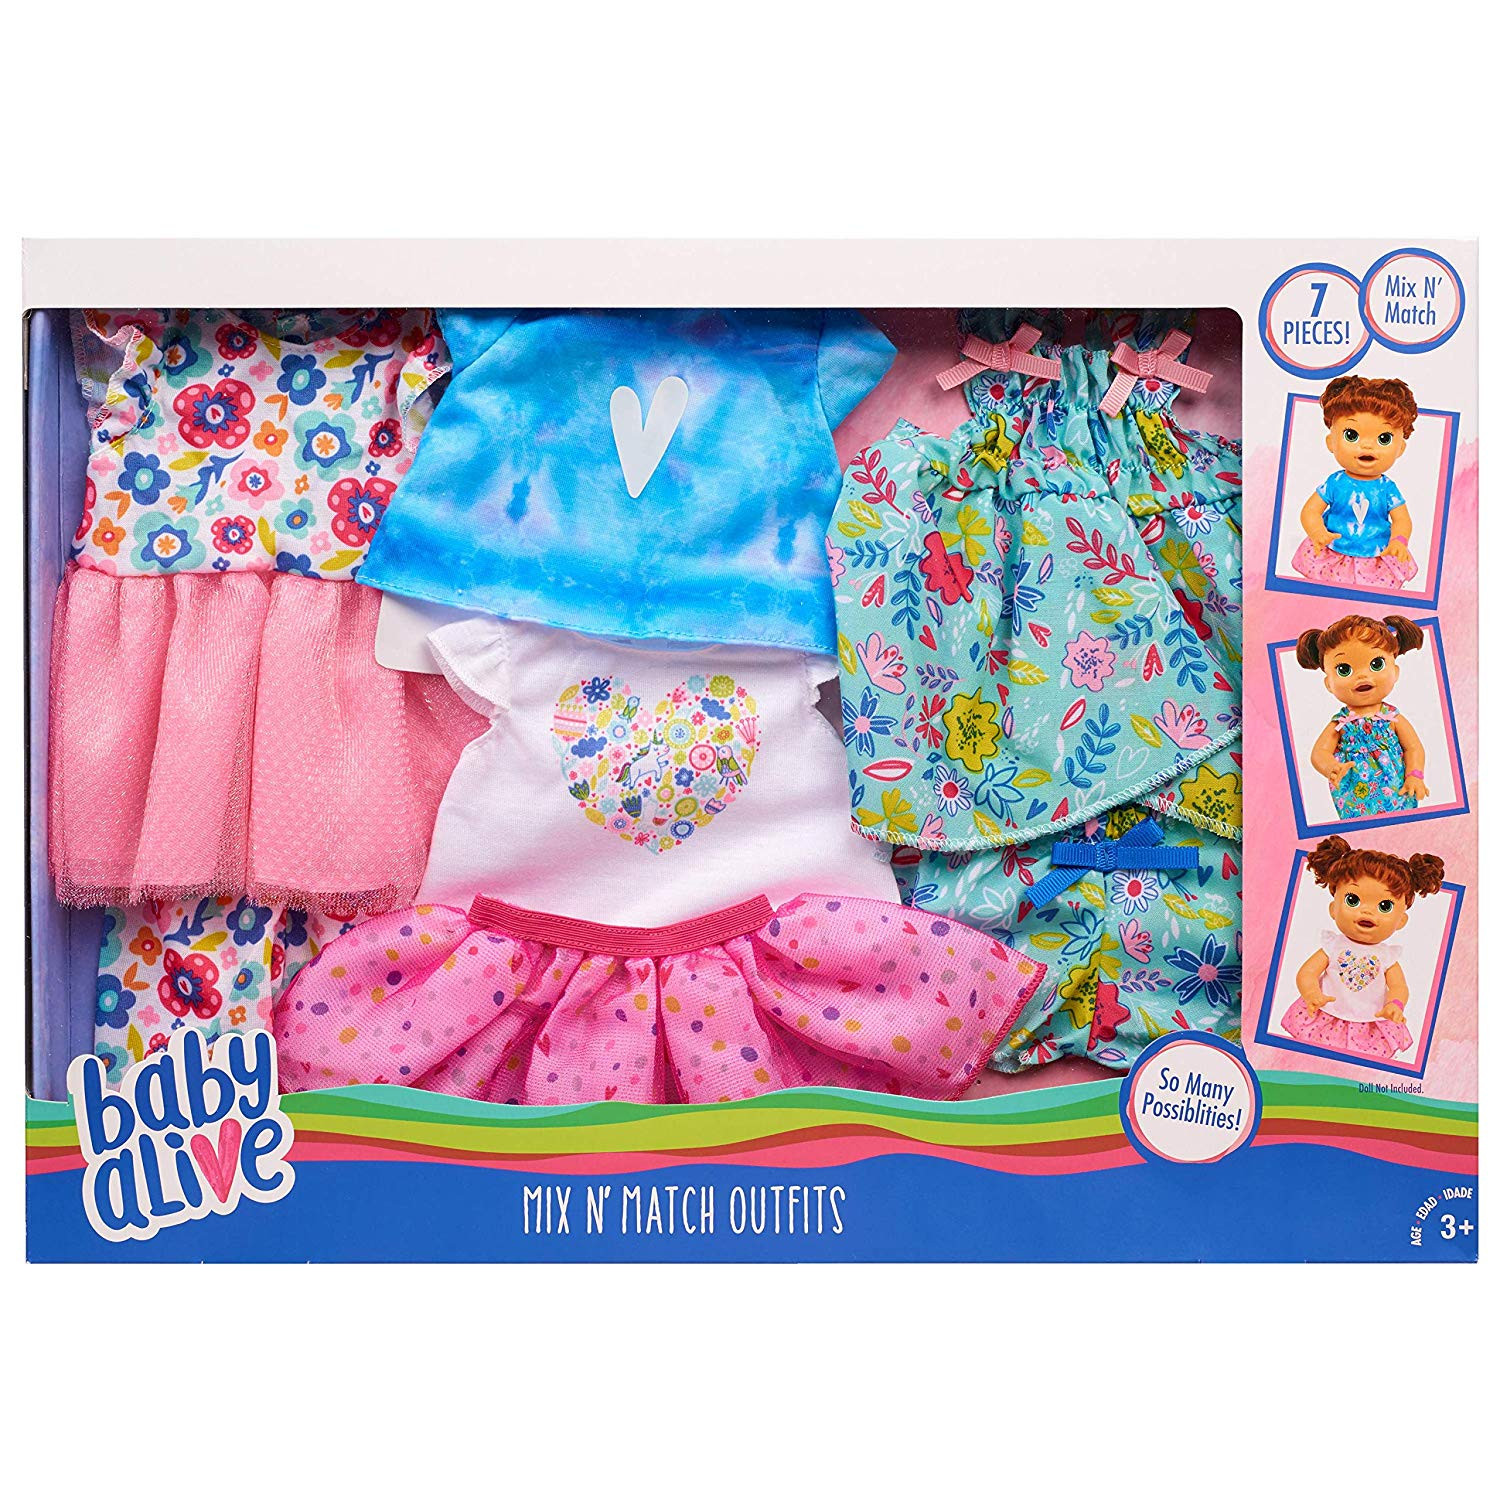 Baby Alive Fashion Set
 Baby Alive Mix N’ Match Outfit Set Set 2 Low Price